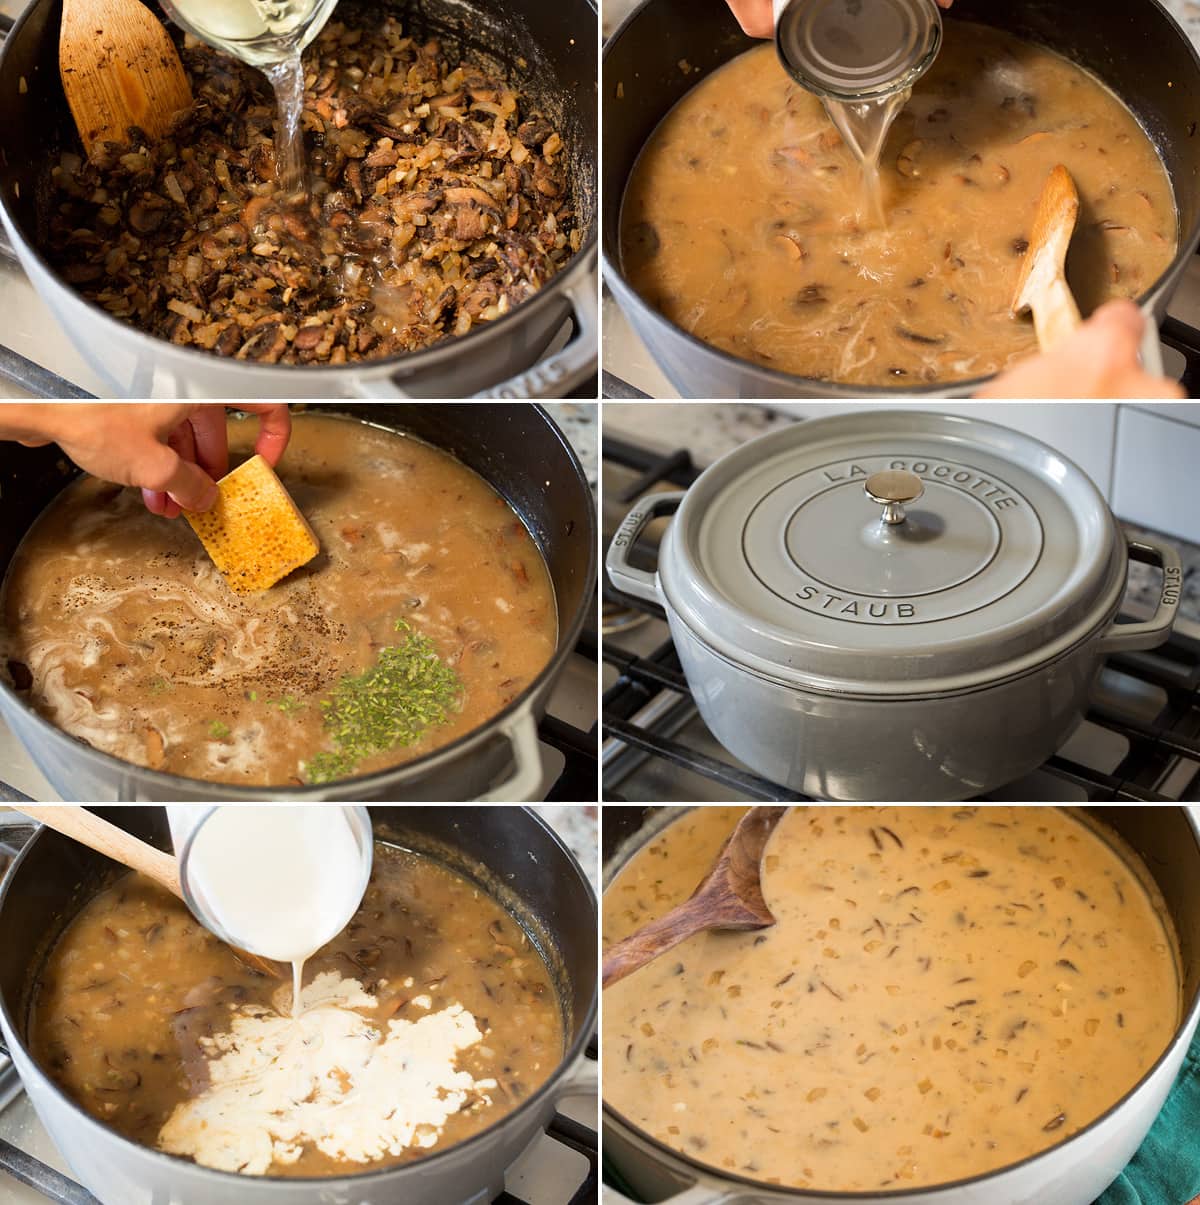 Six continued images showing how to finish making cream of mushroom soup.